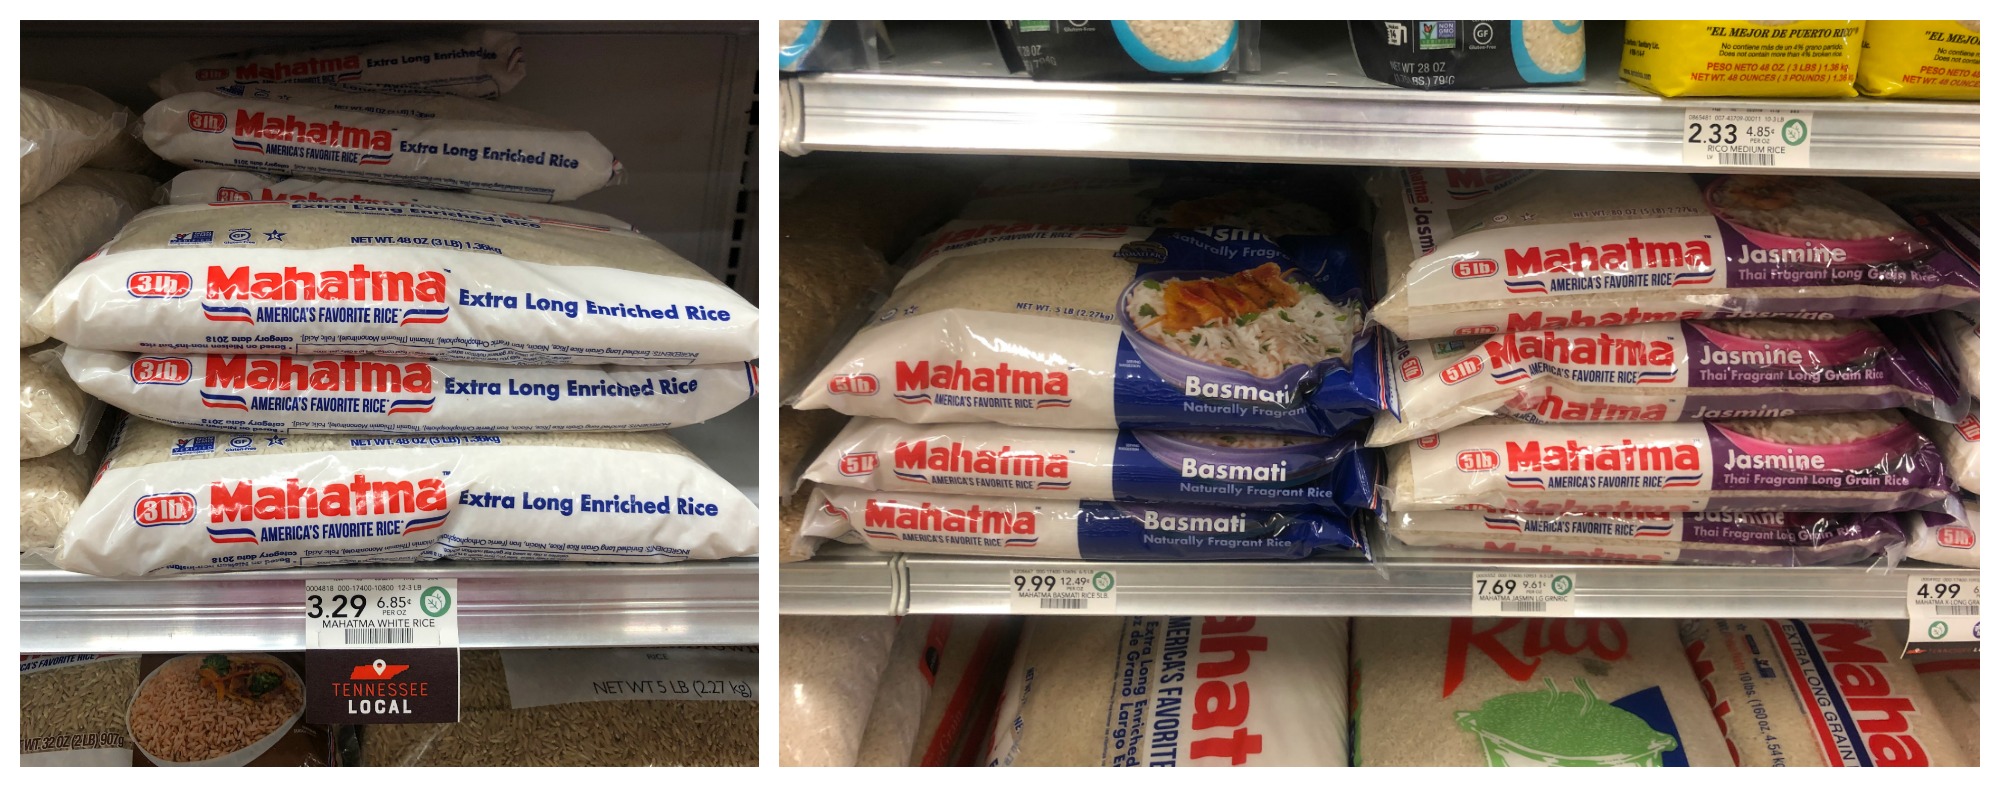 Save $1.50 On Mahatma Rice At Publix - Grab A Great Deal & Serve Up My Mexican Picadillo Recipe! on I Heart Publix